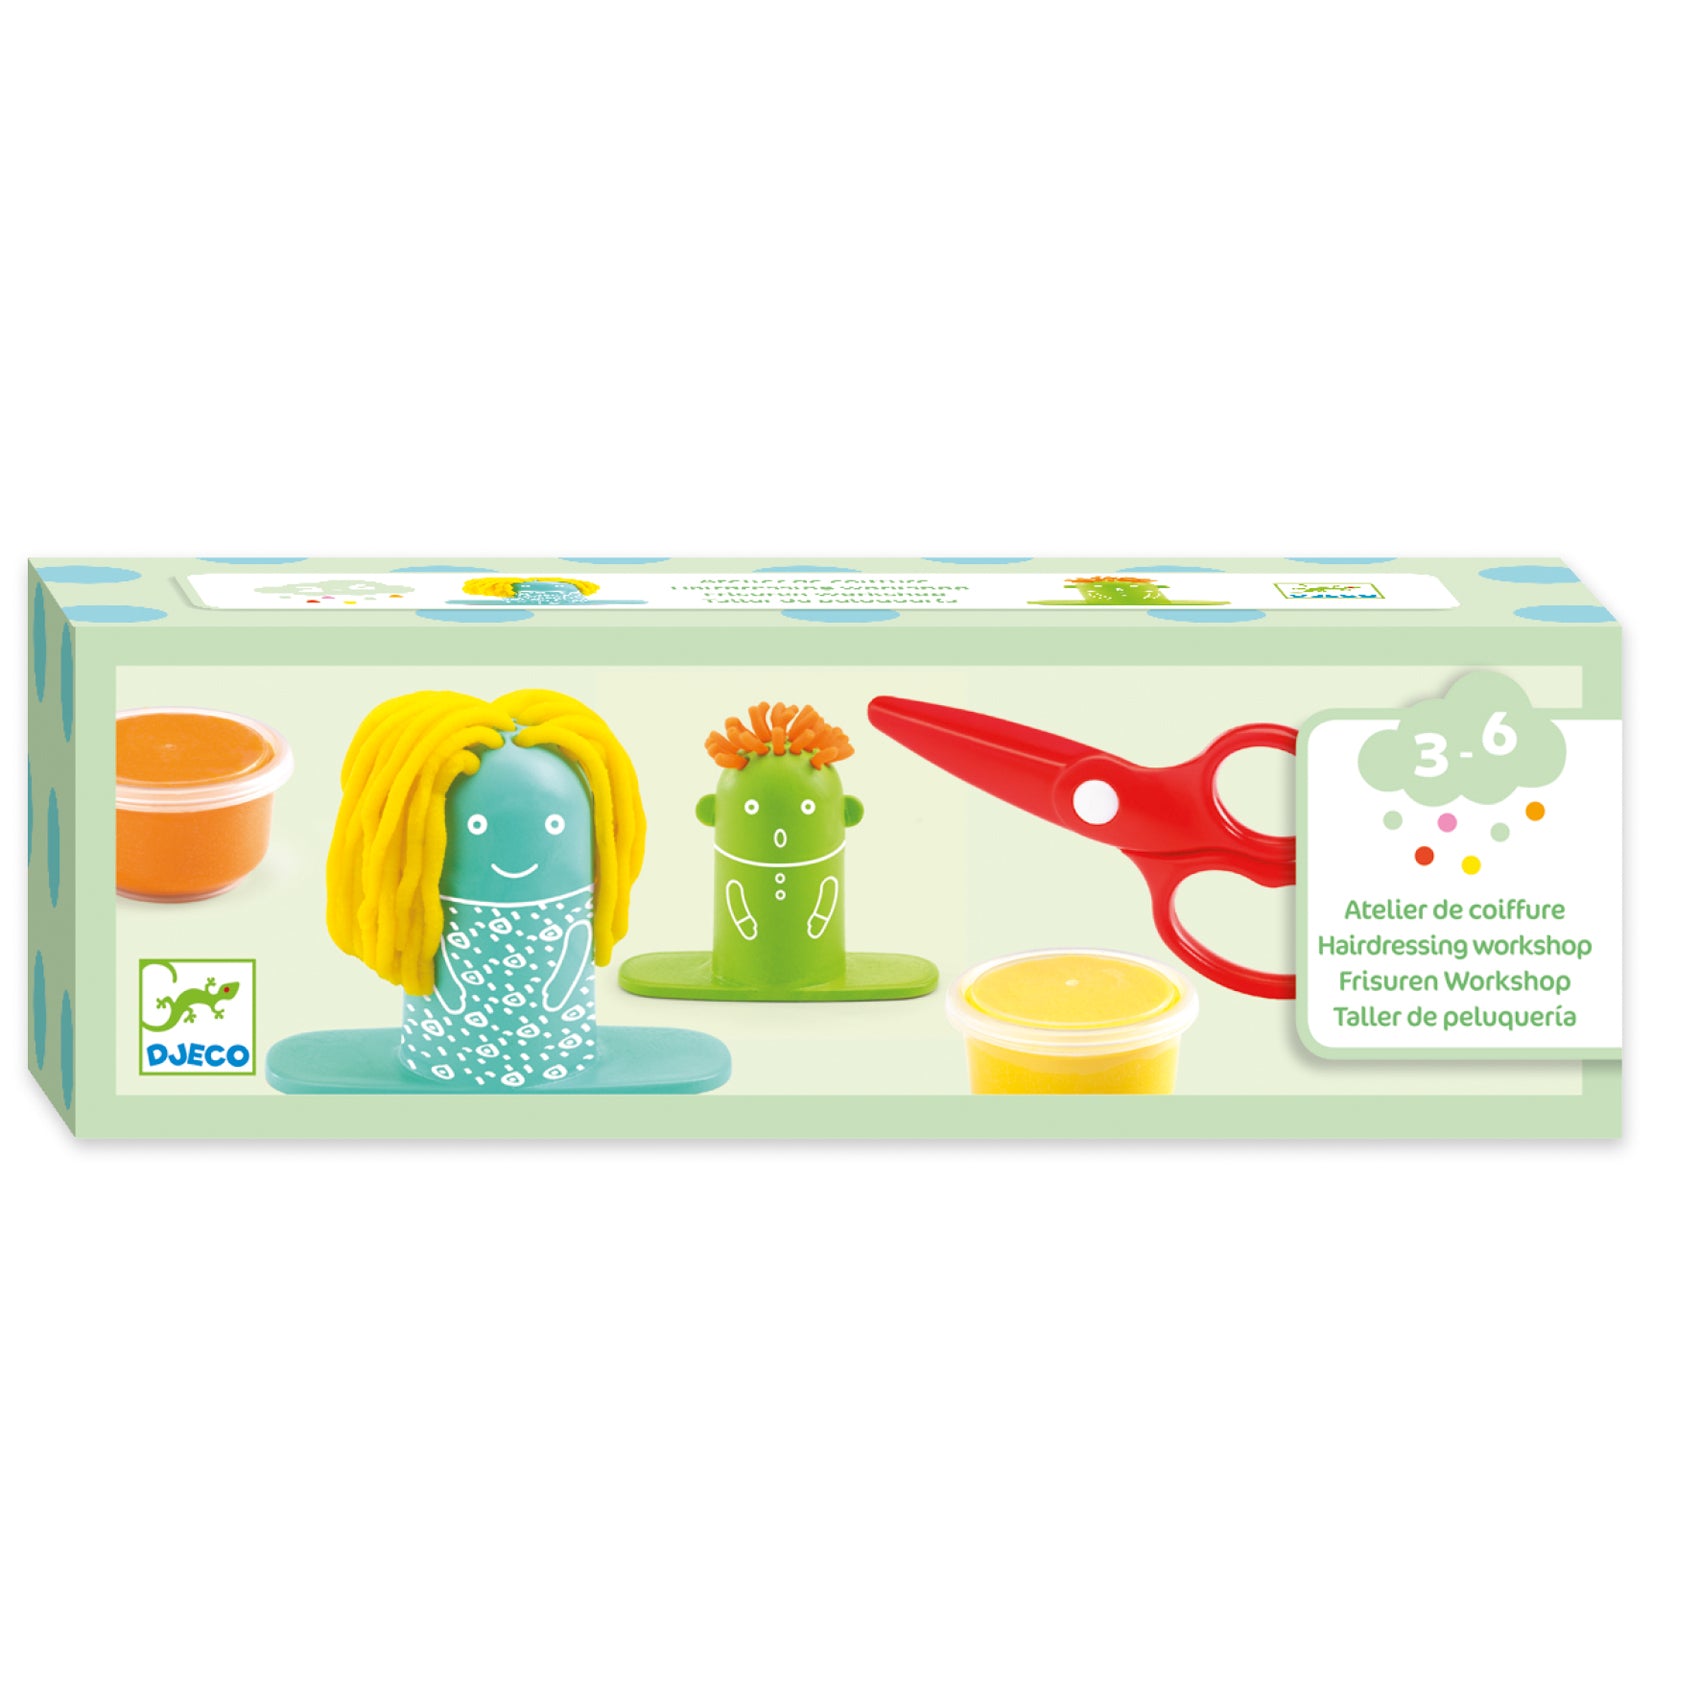 Djeco Hairdresser Modelling Play Dough Playset